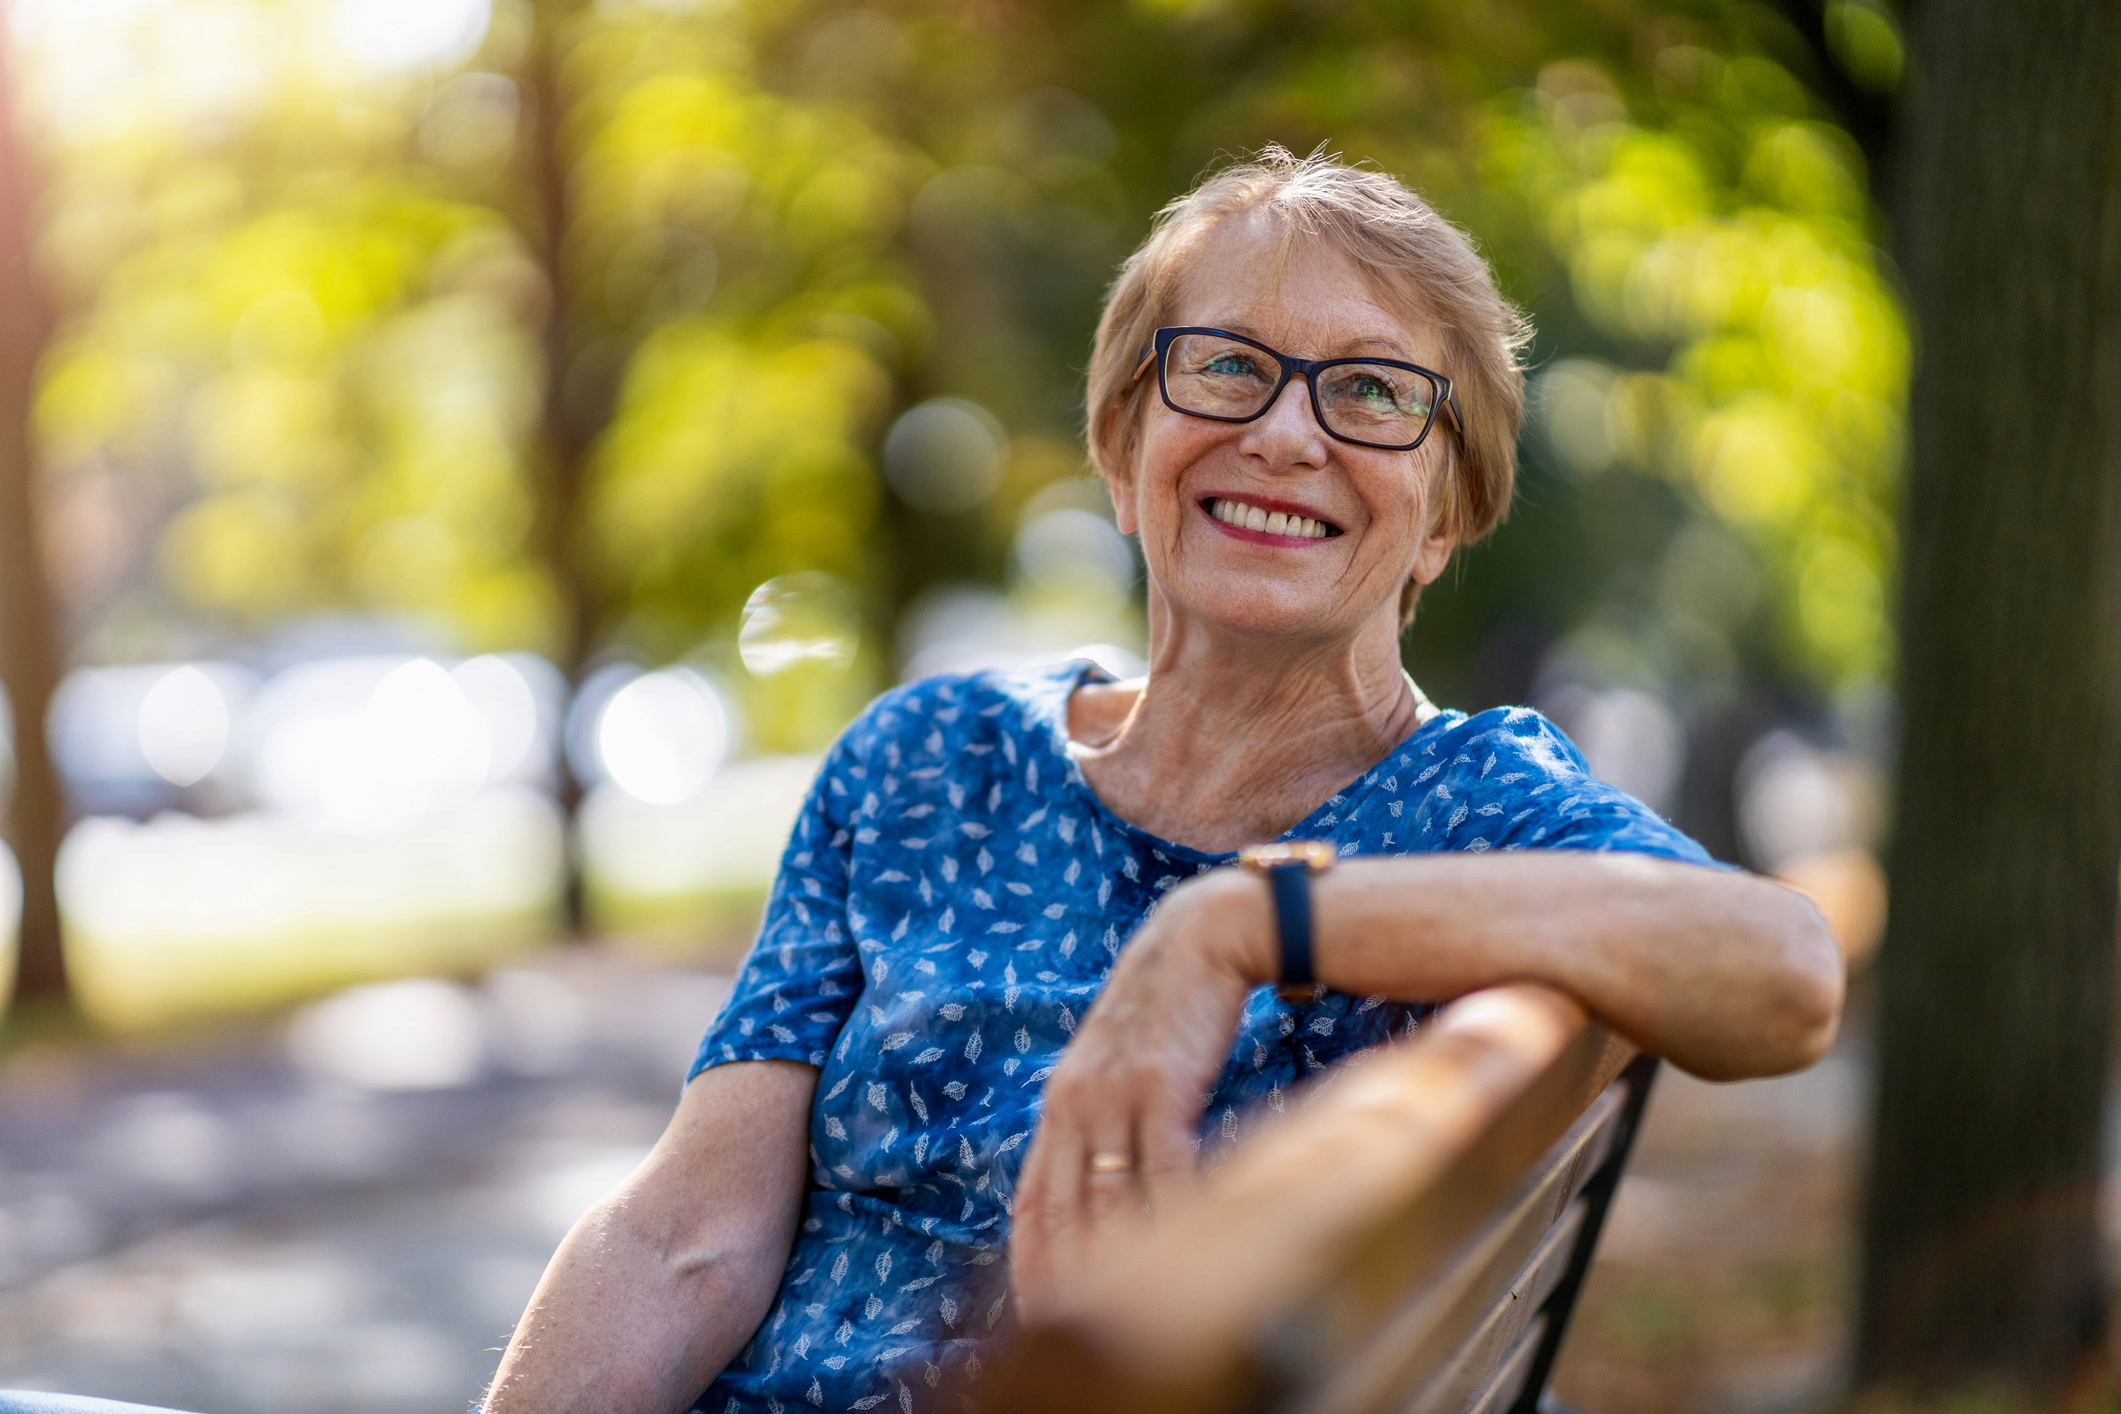 An older woman wearing glasses and a patterned blouse sits on a park bench, smiling at the camera. Trees and sunlight are visible in the background